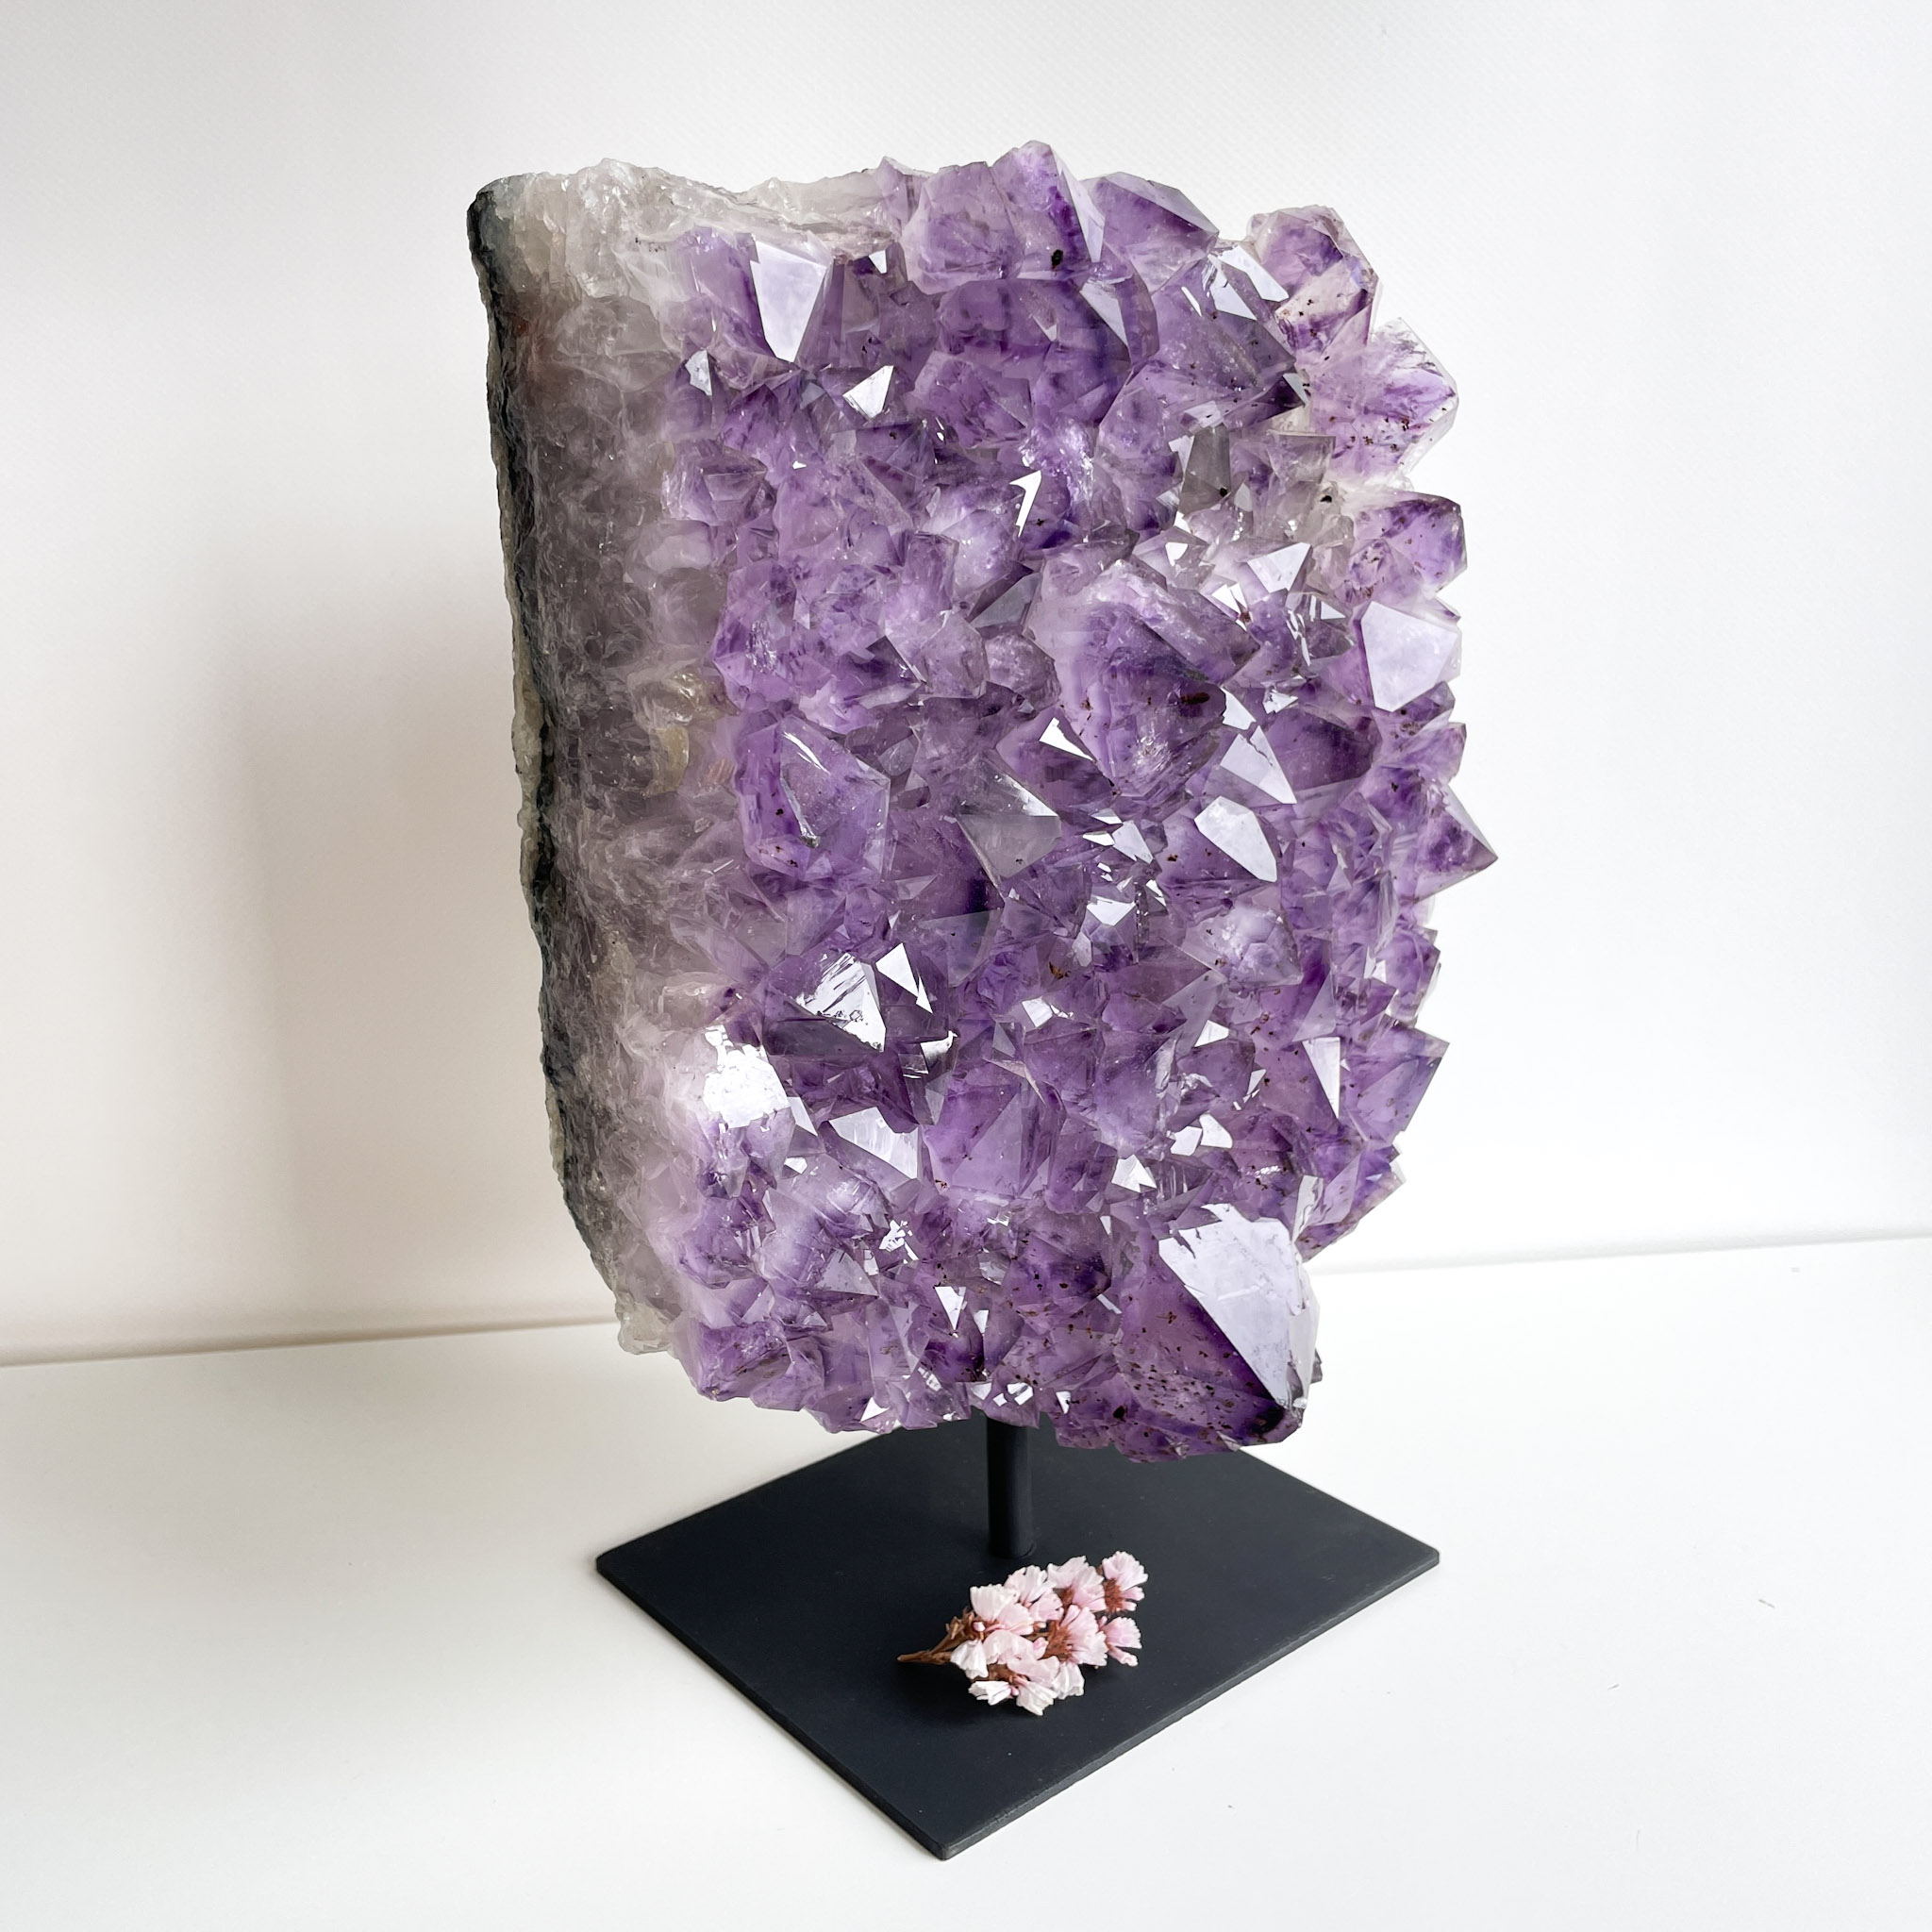 A large amethyst geode on a black stand with a cluster of pink flowers at its base, displayed against a white background.